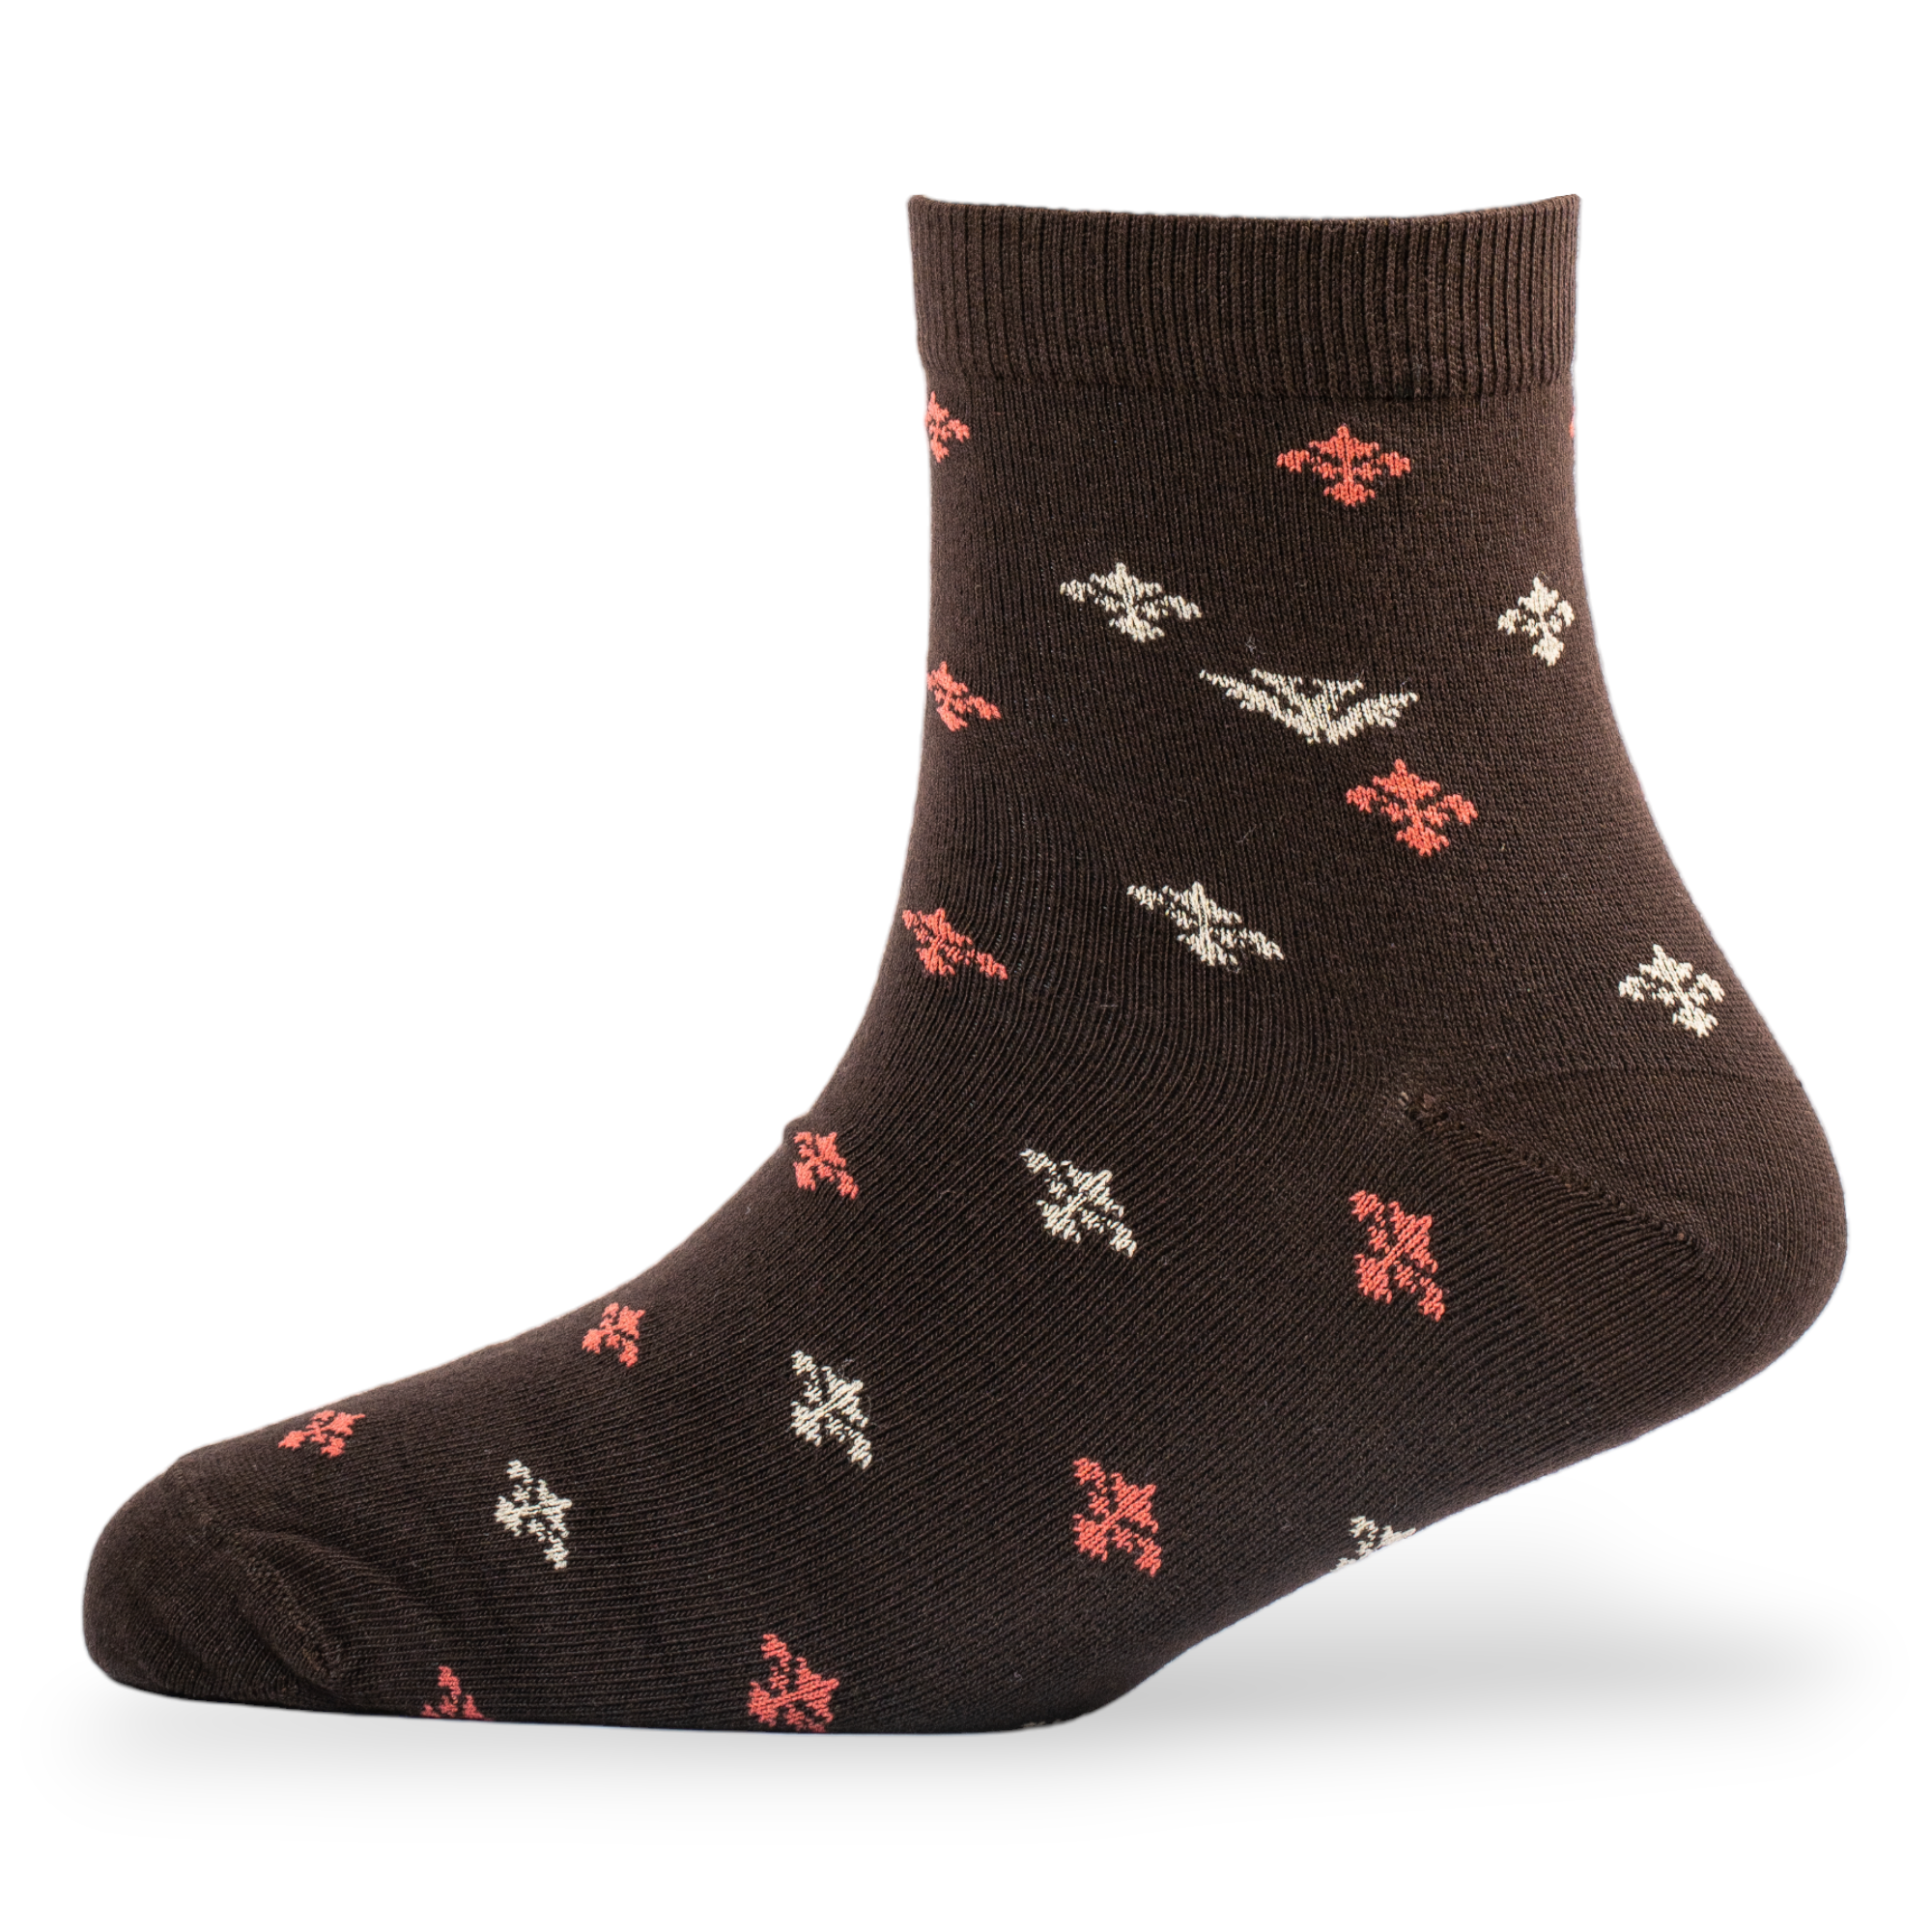 Young Wings Men's Multi Colour Cotton Fabric Design Ankle Length Socks - Pack of 5, Style no. 2722-M1